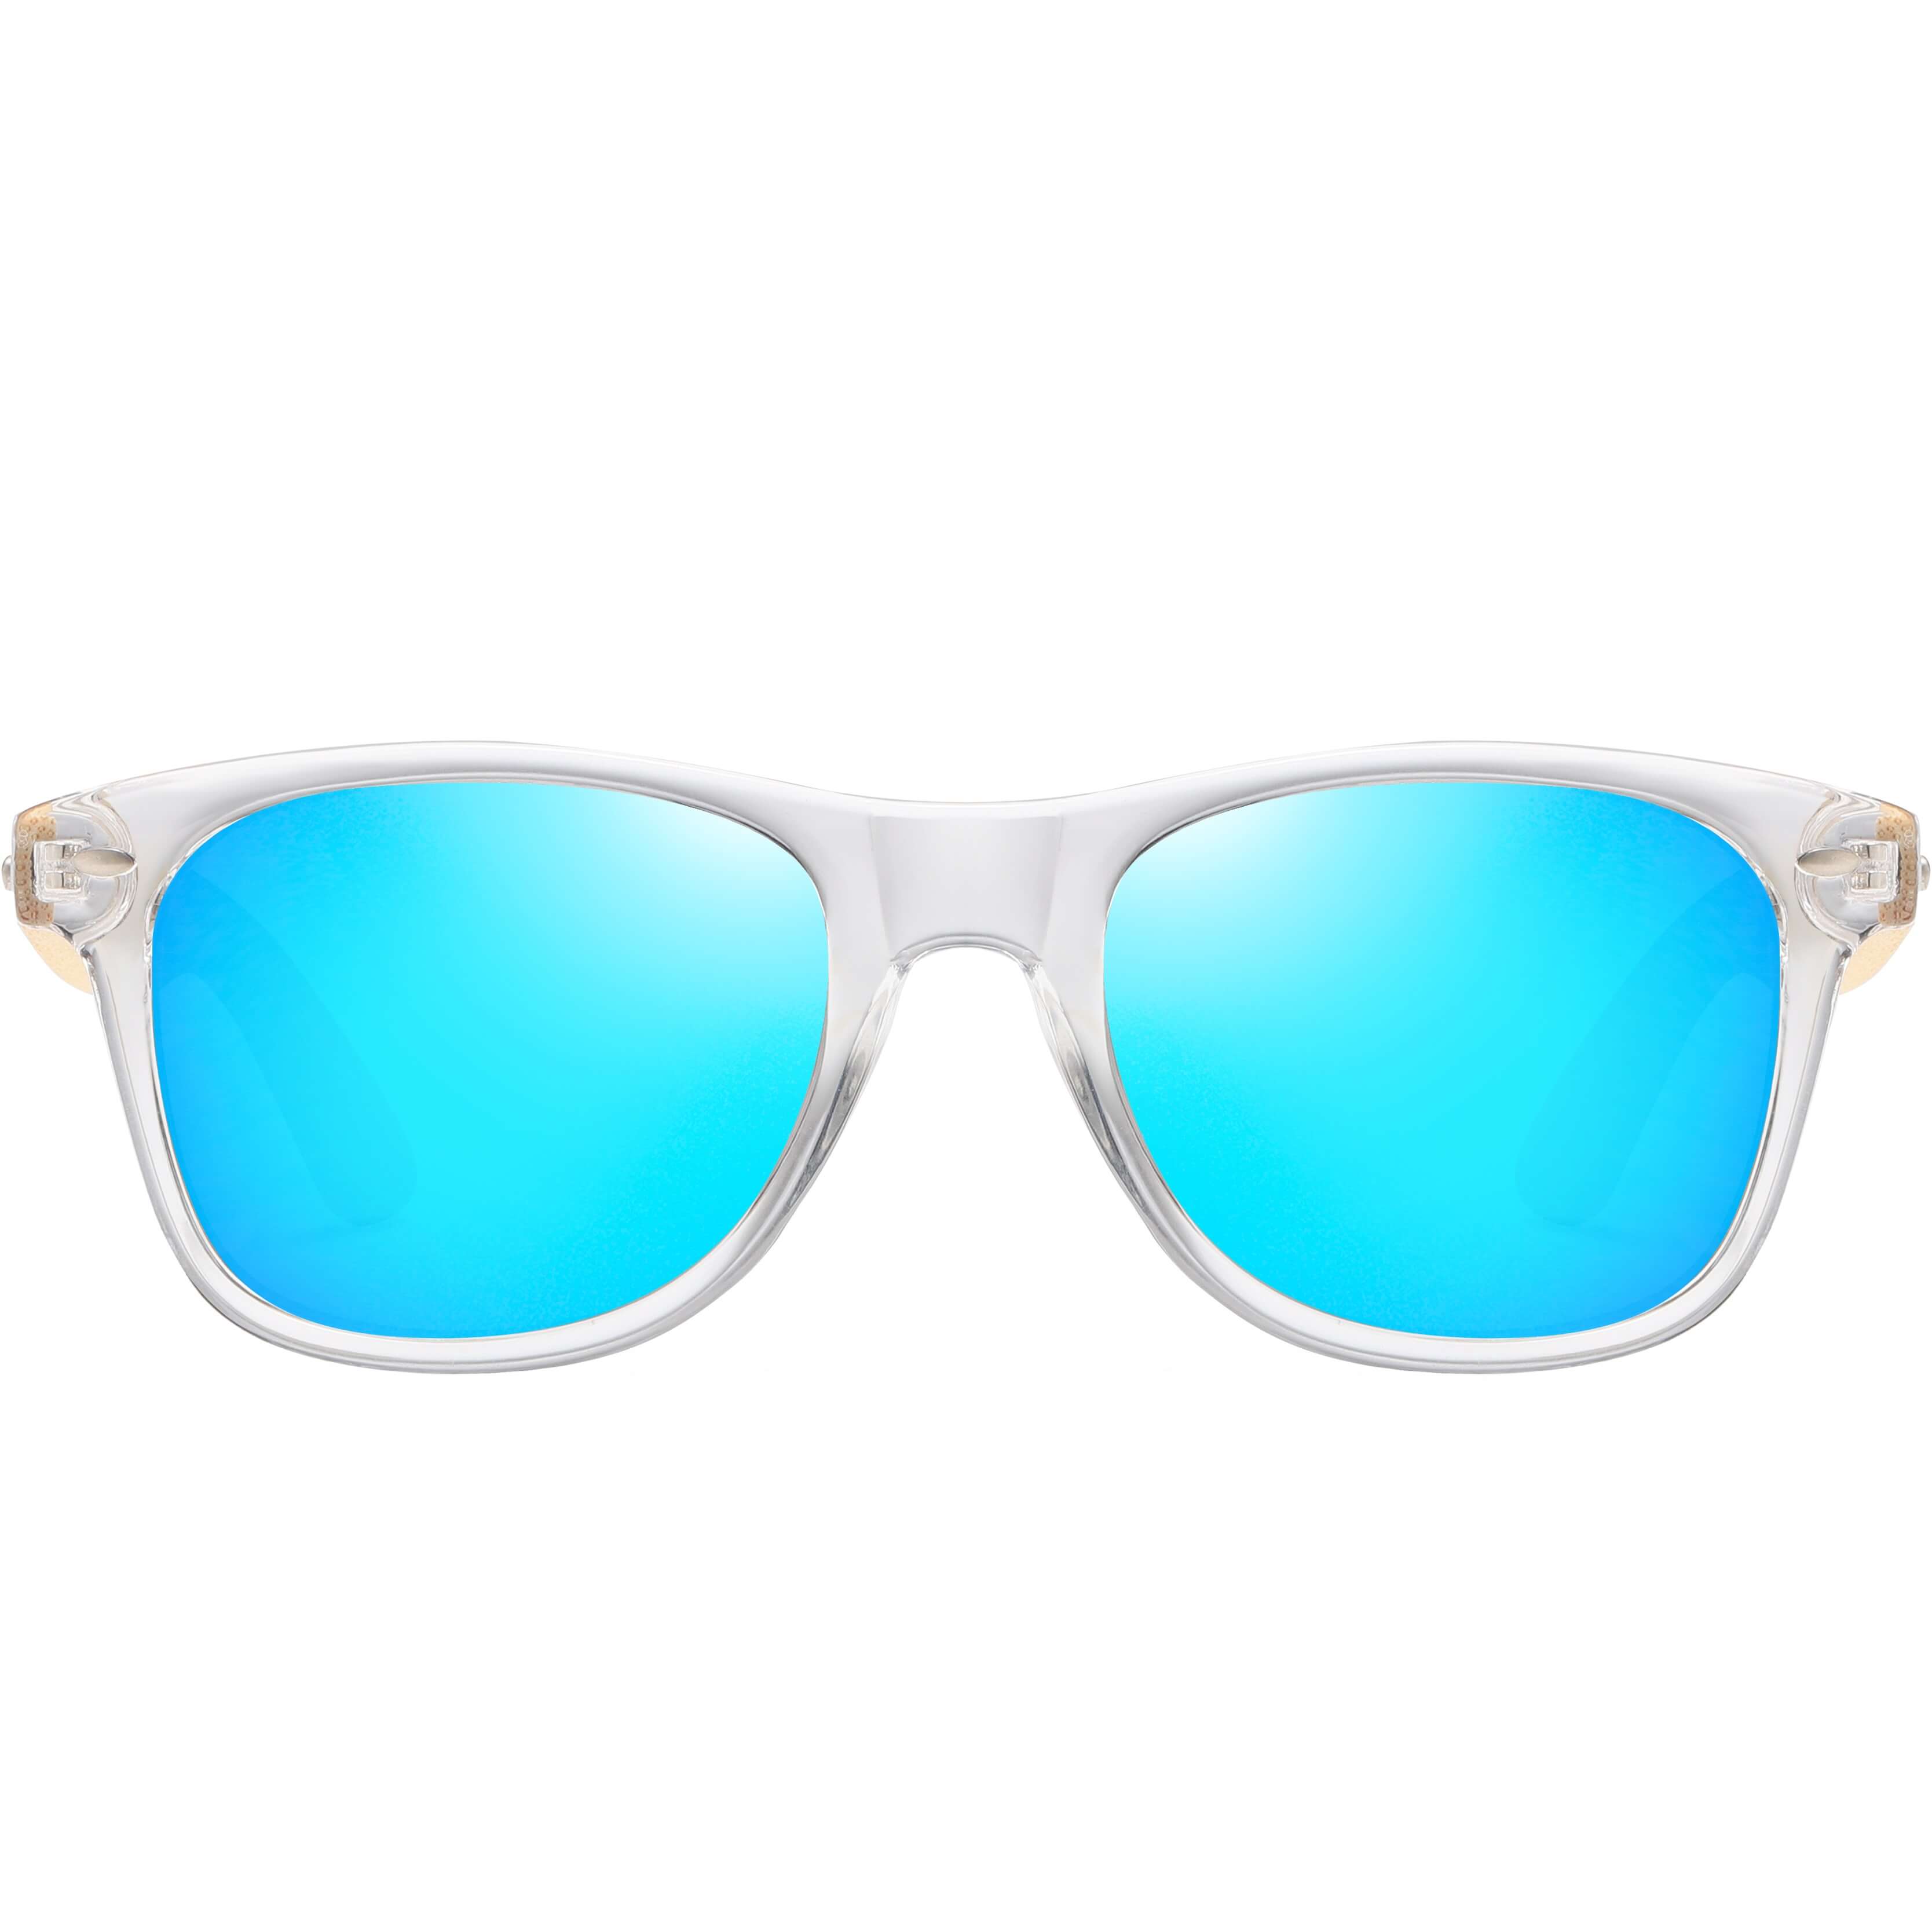 aofe's Dulcet vibrant blue square wayfarer unique design handmade wooden sunglasses for men and women with mirrored polarized lenses